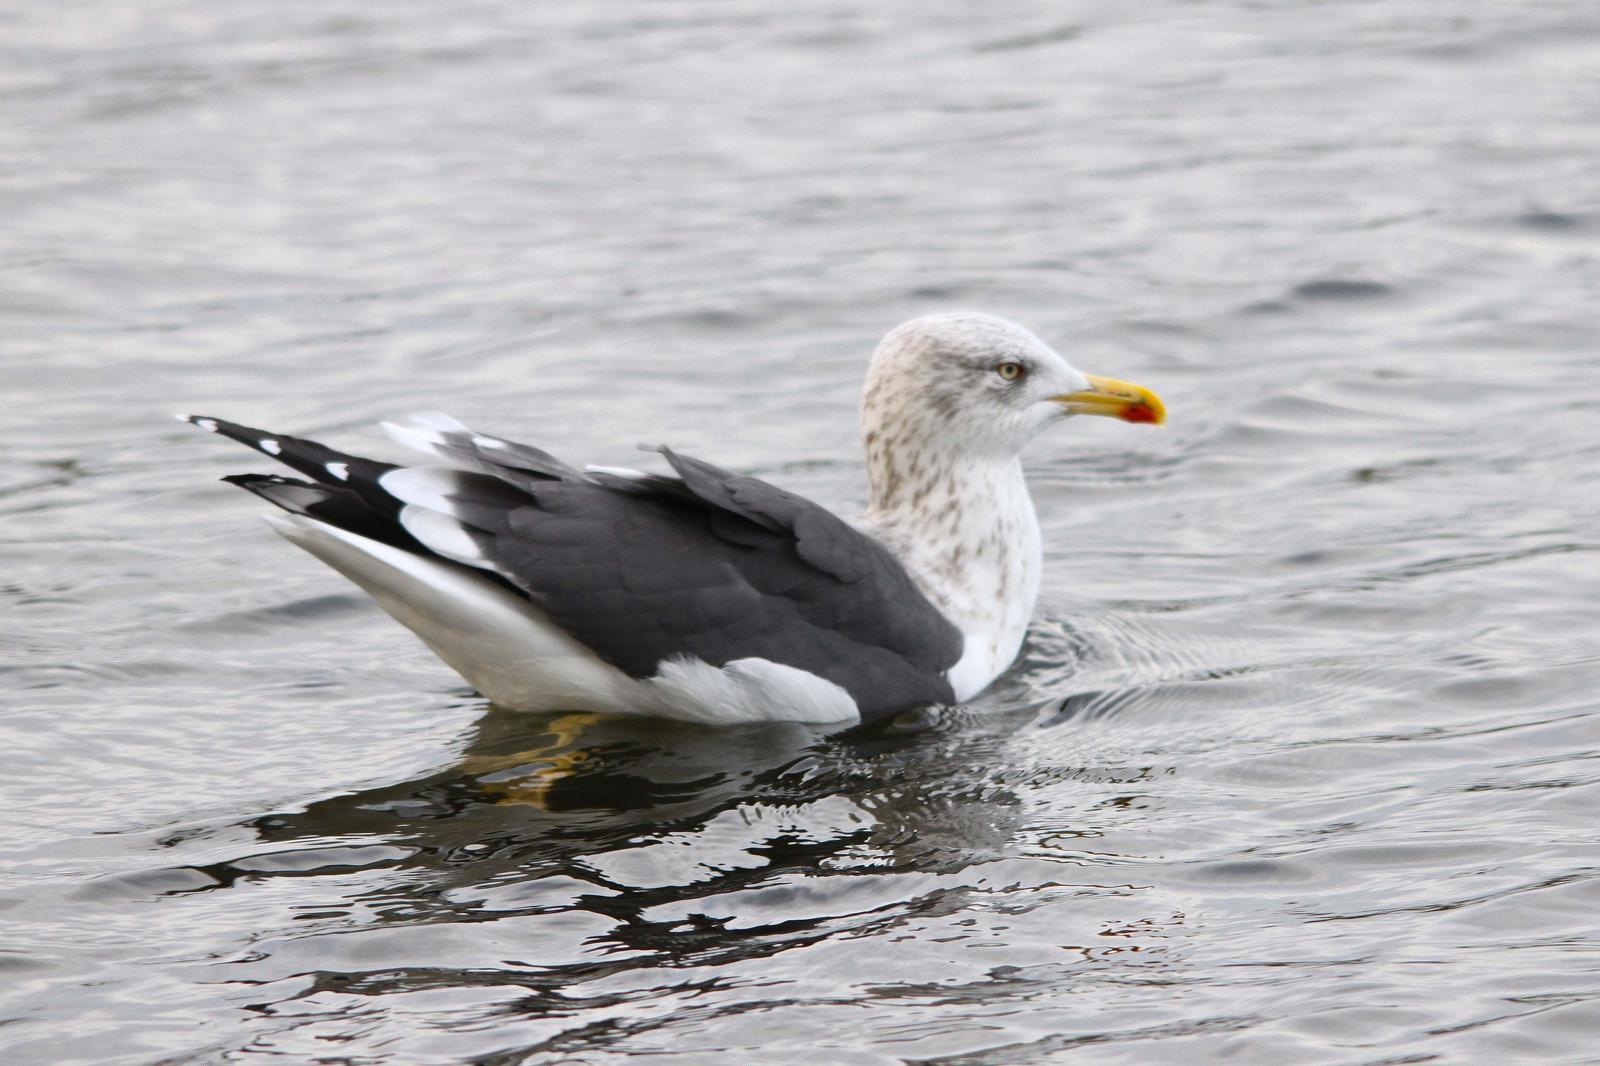 Lesser Black-backed Gull Photo by Tom Ford-Hutchinson